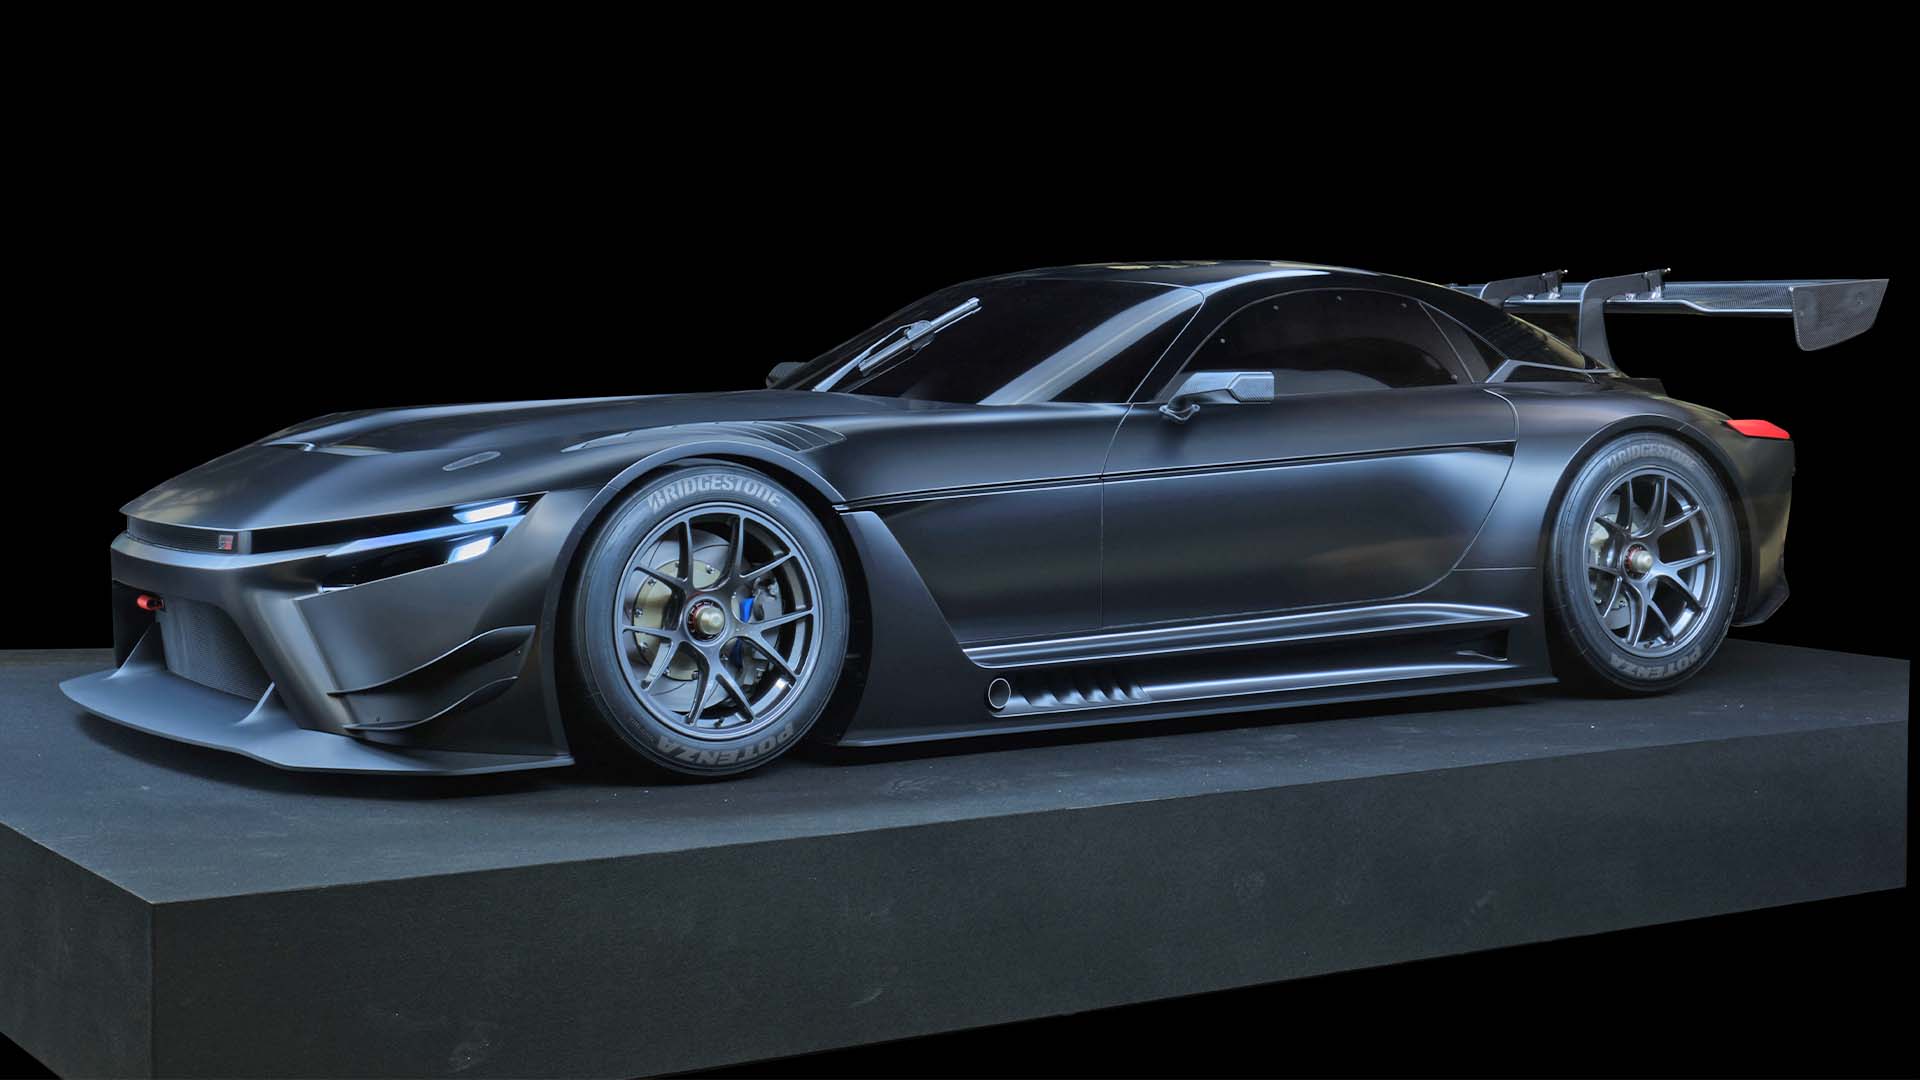 Toyota GT3 Race Car Concept Has a Giant Wing, Could Run on Hydrogen